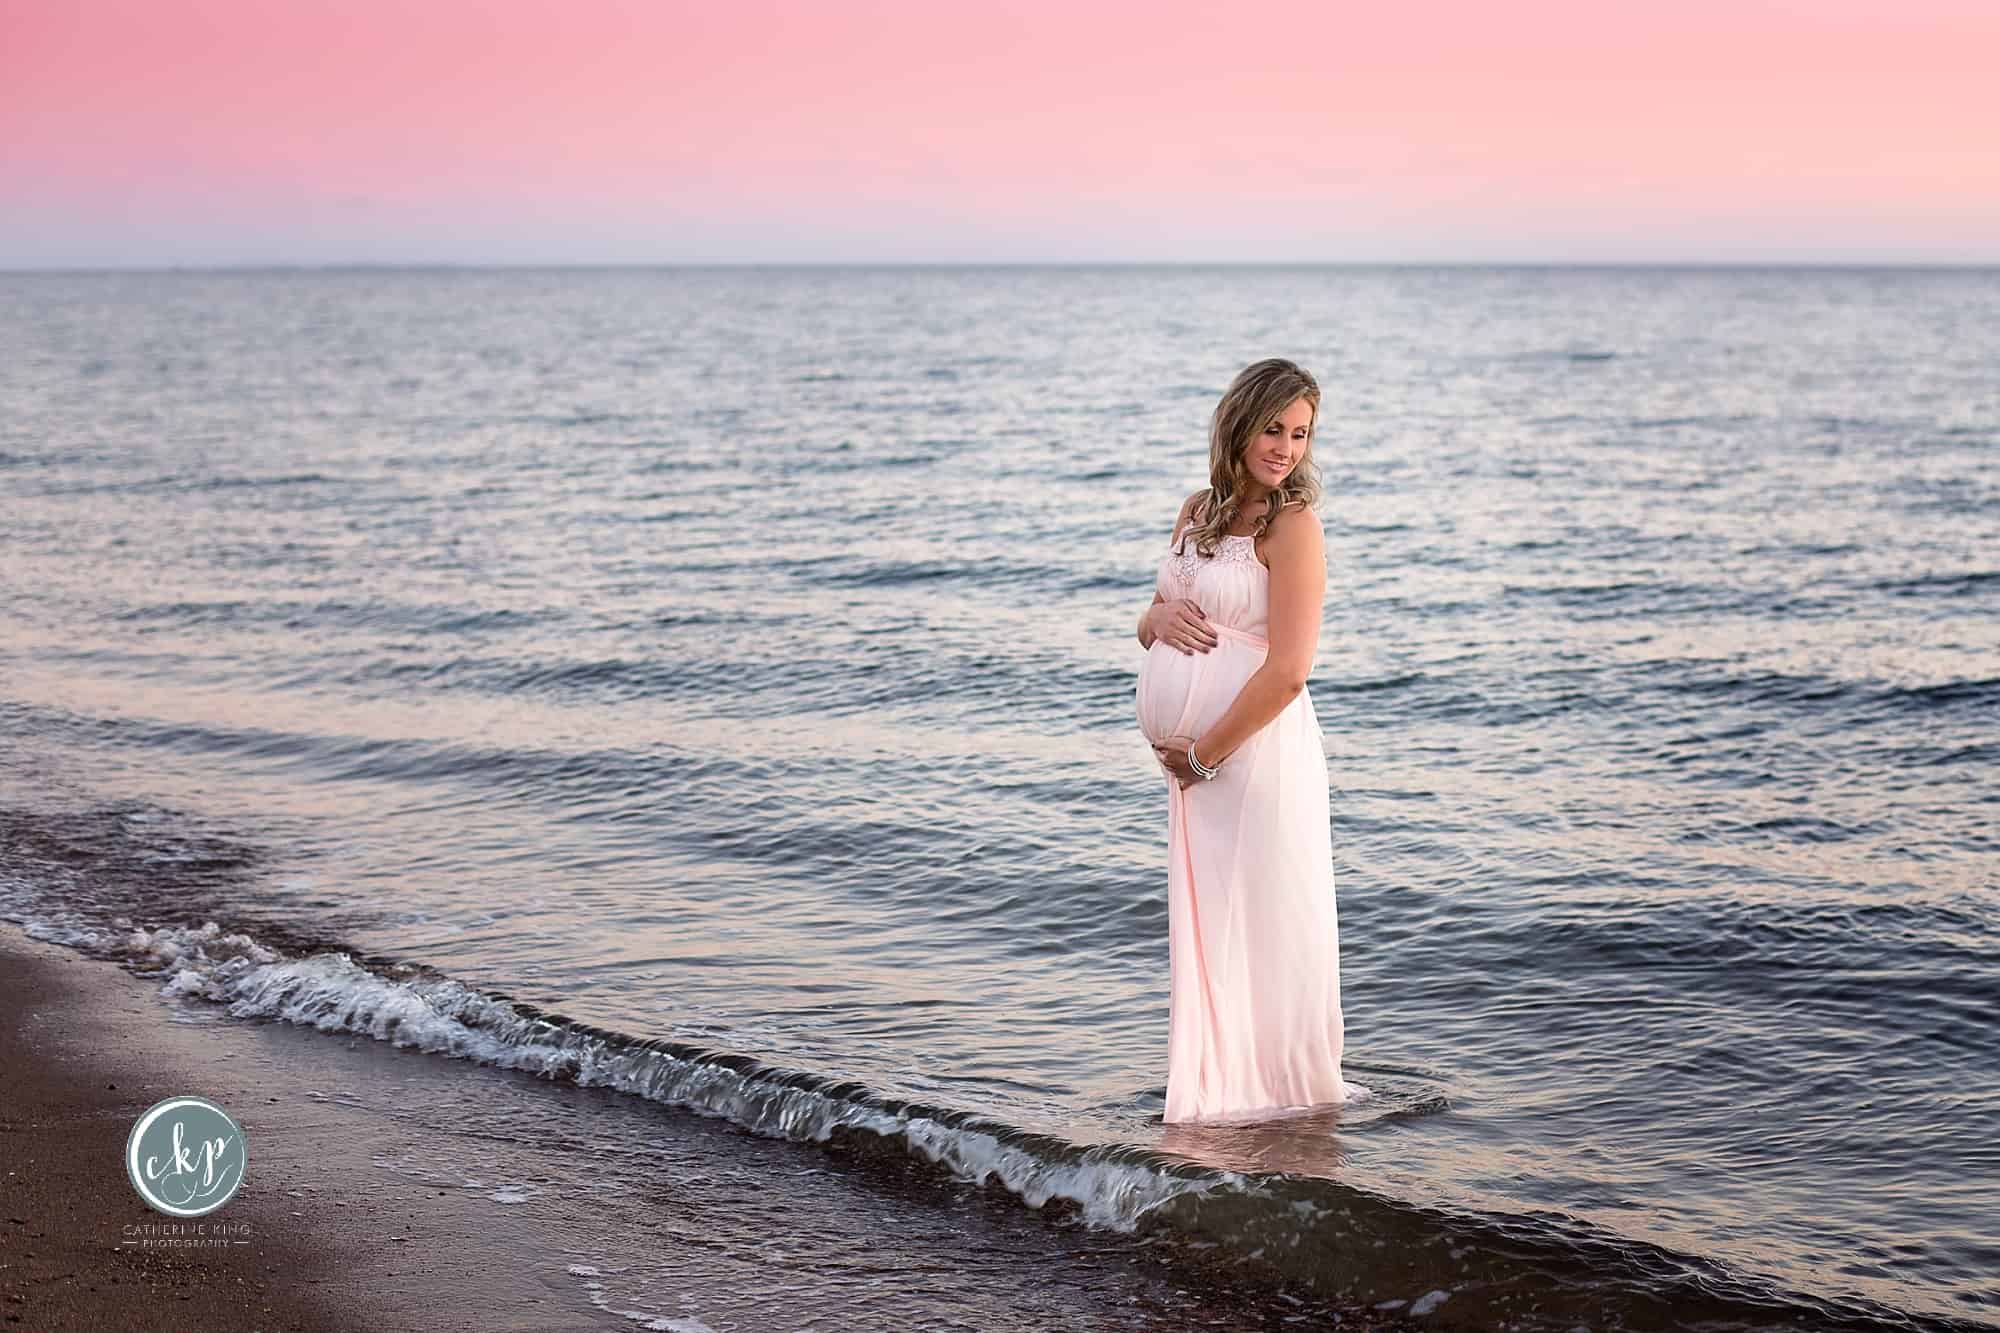 fine art maternity photgoraphy session on the ct shoreline beach with catherine king photography a ct maternity photographer